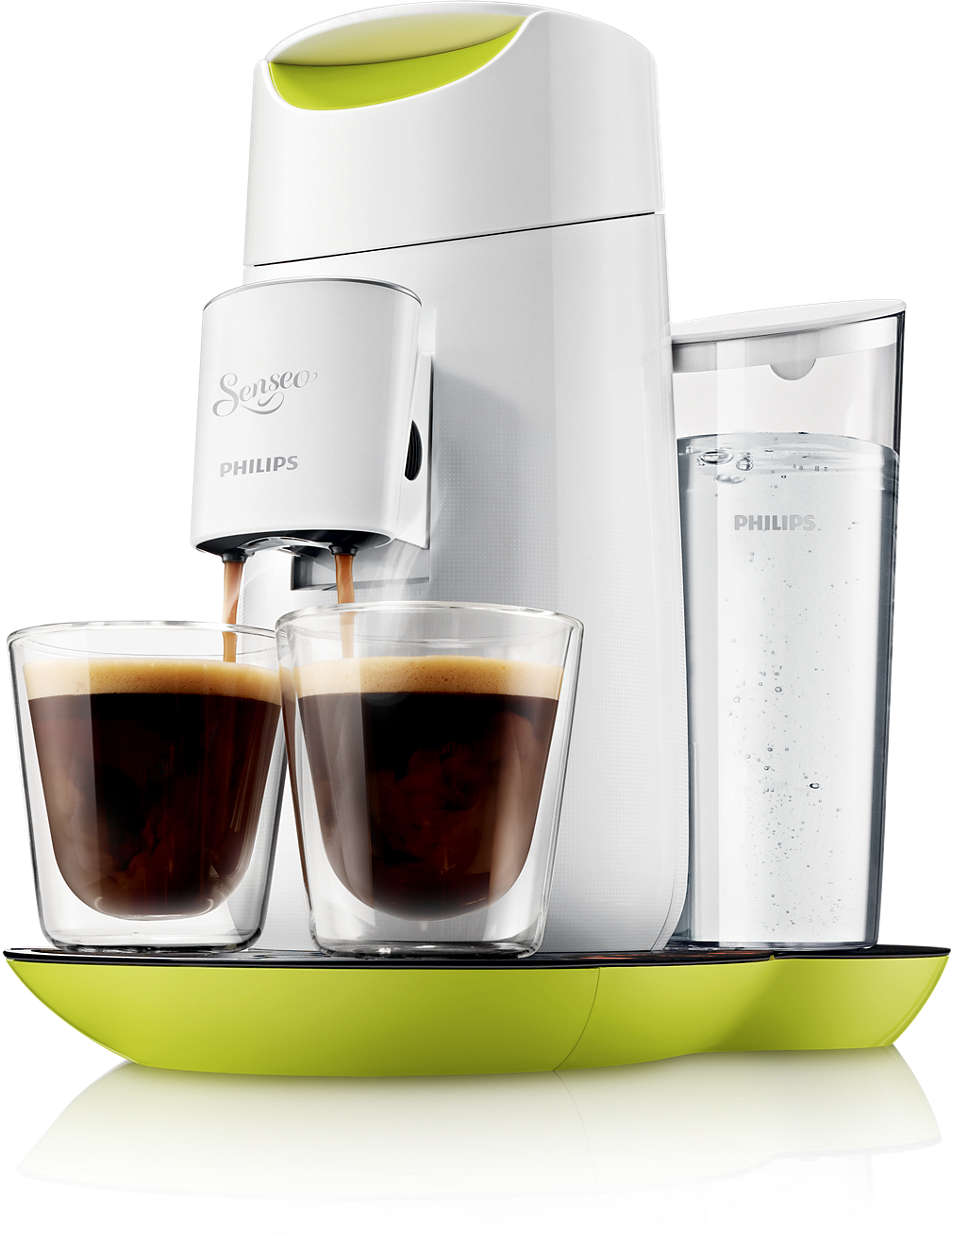 Brew your SENSEO® coffee the way you like it